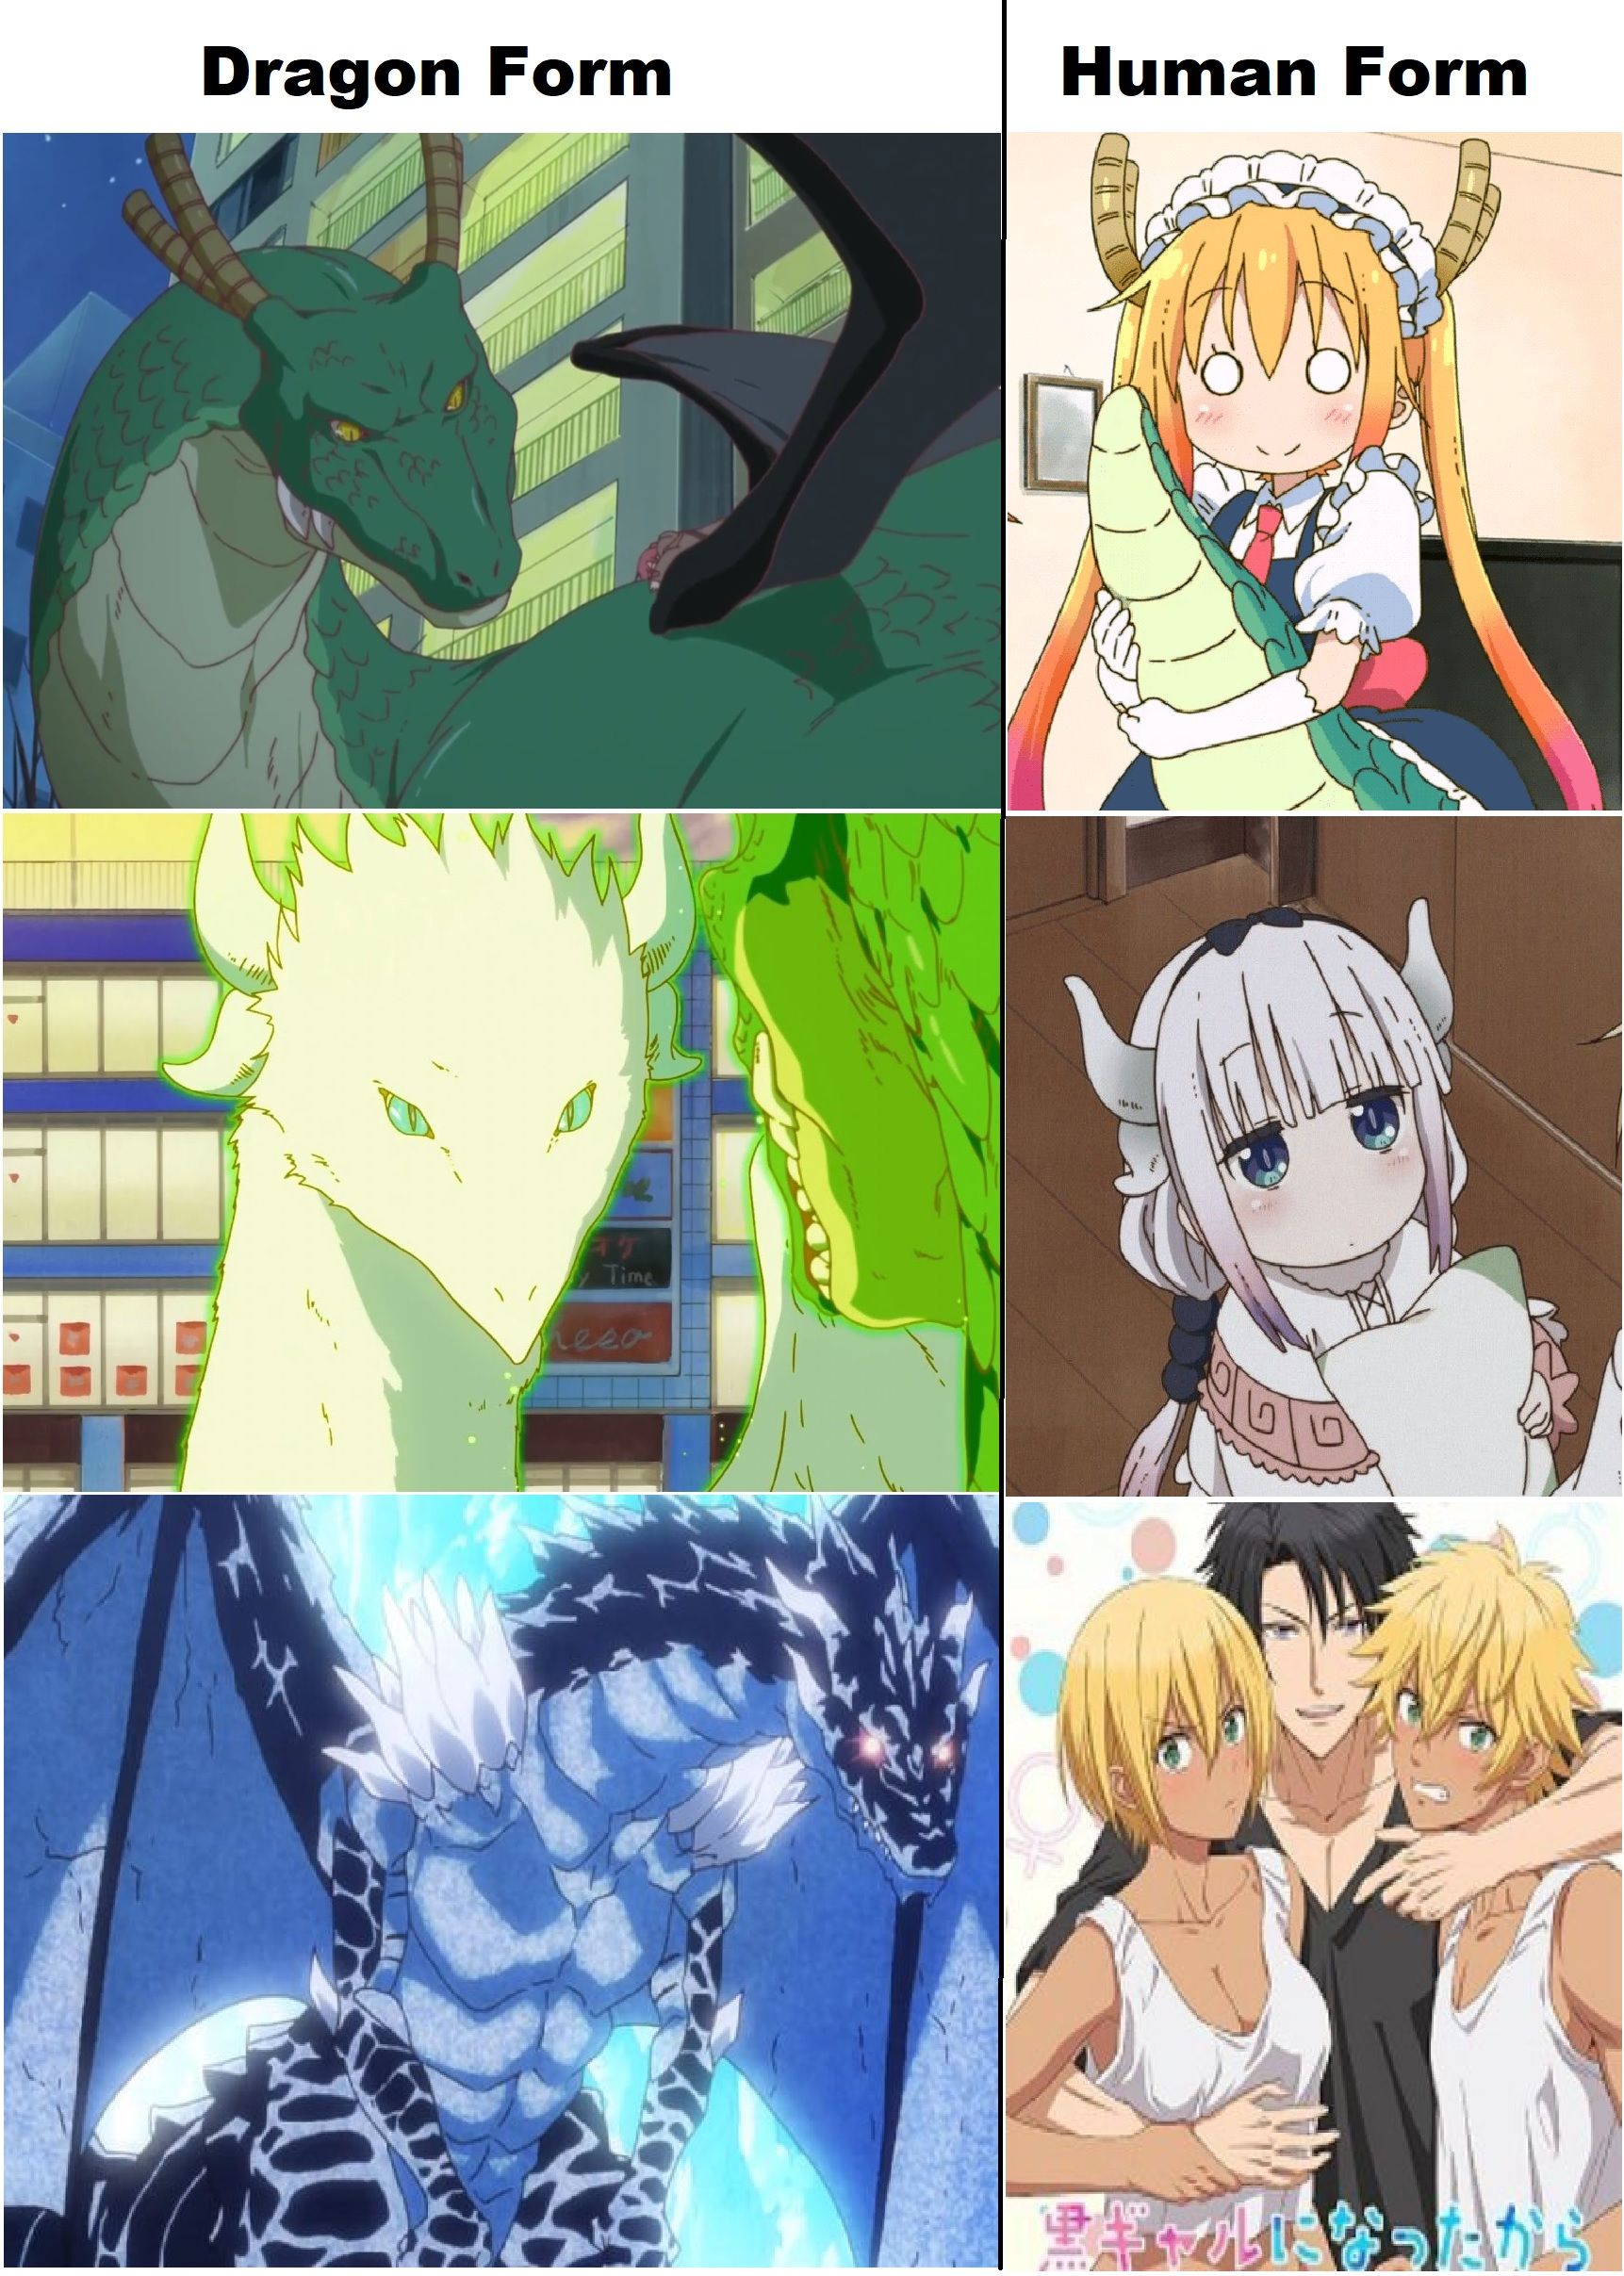 Dragons in Anime